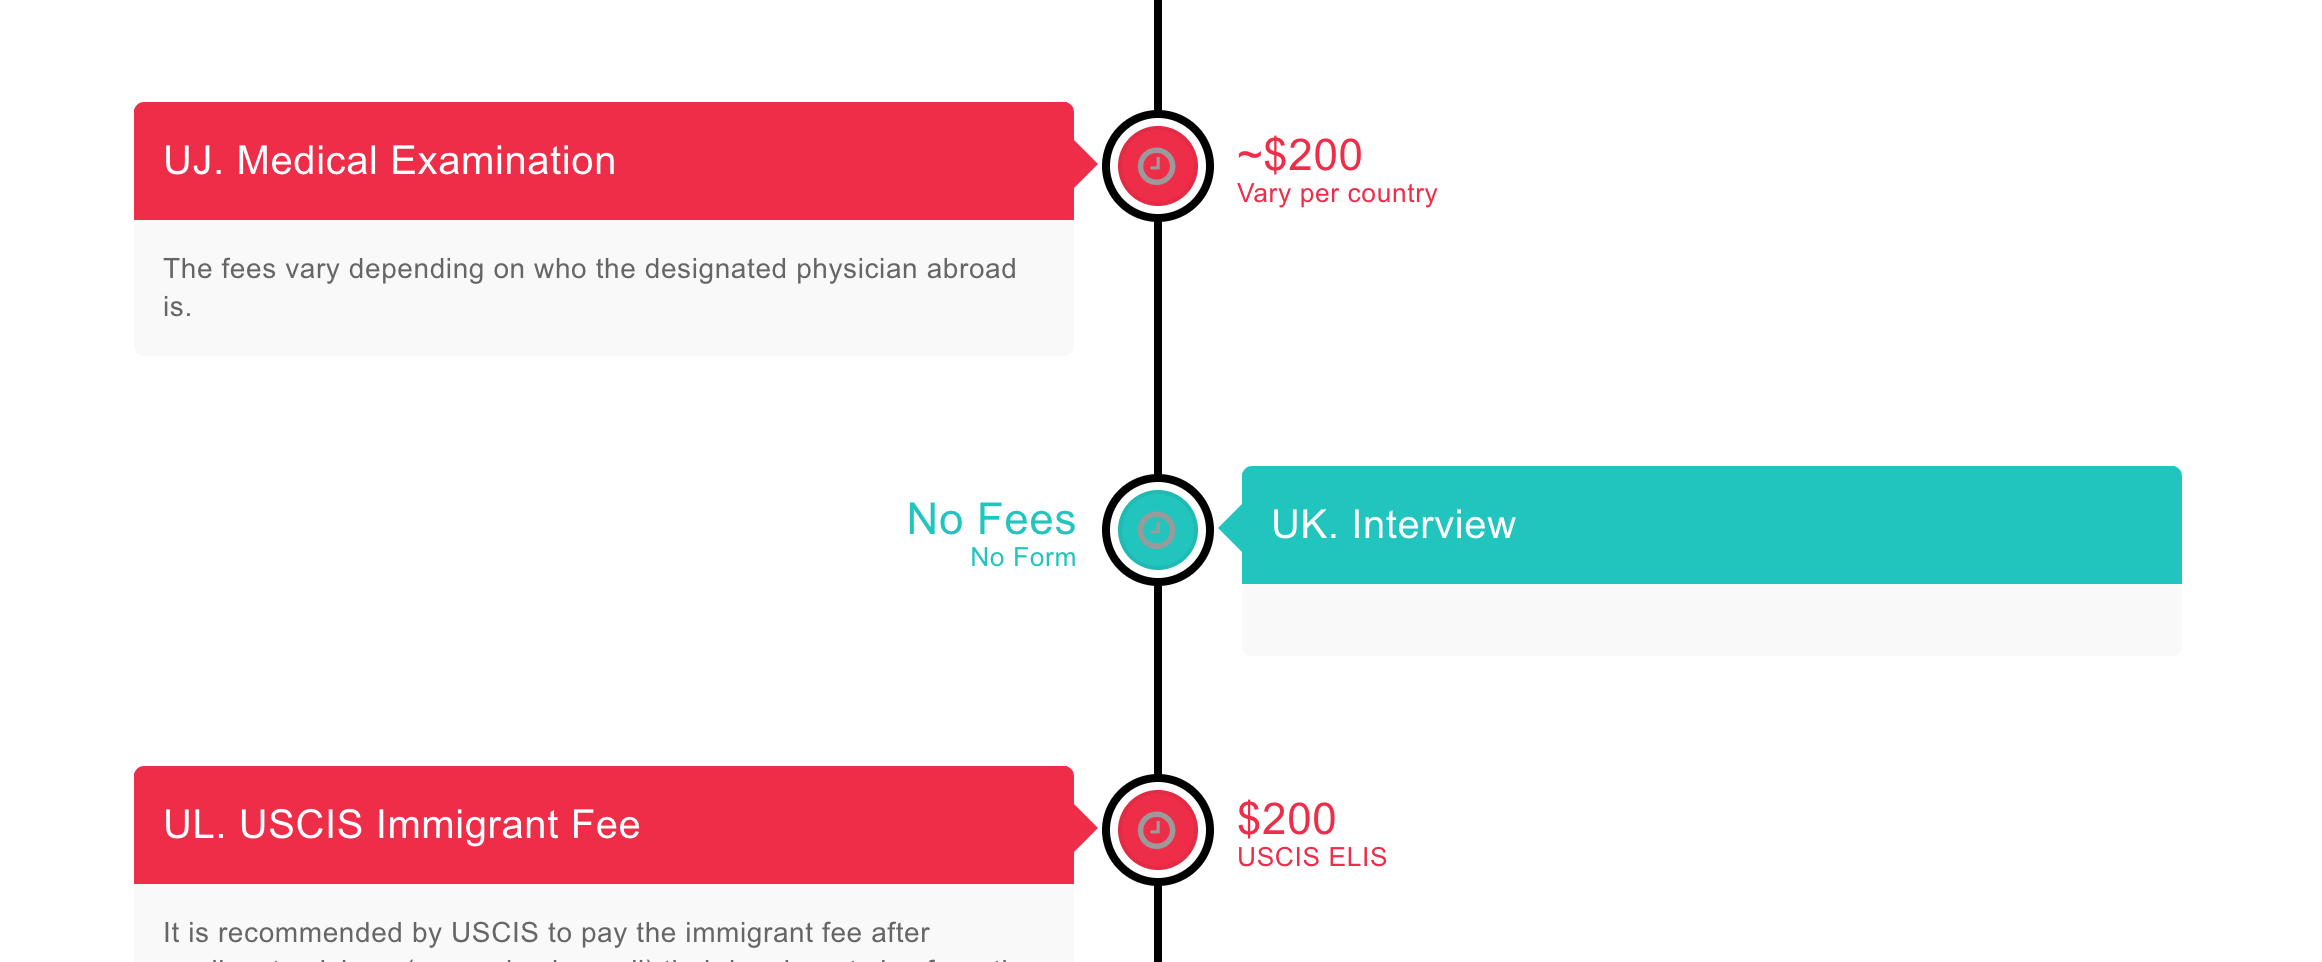 Green Card fees vary per country